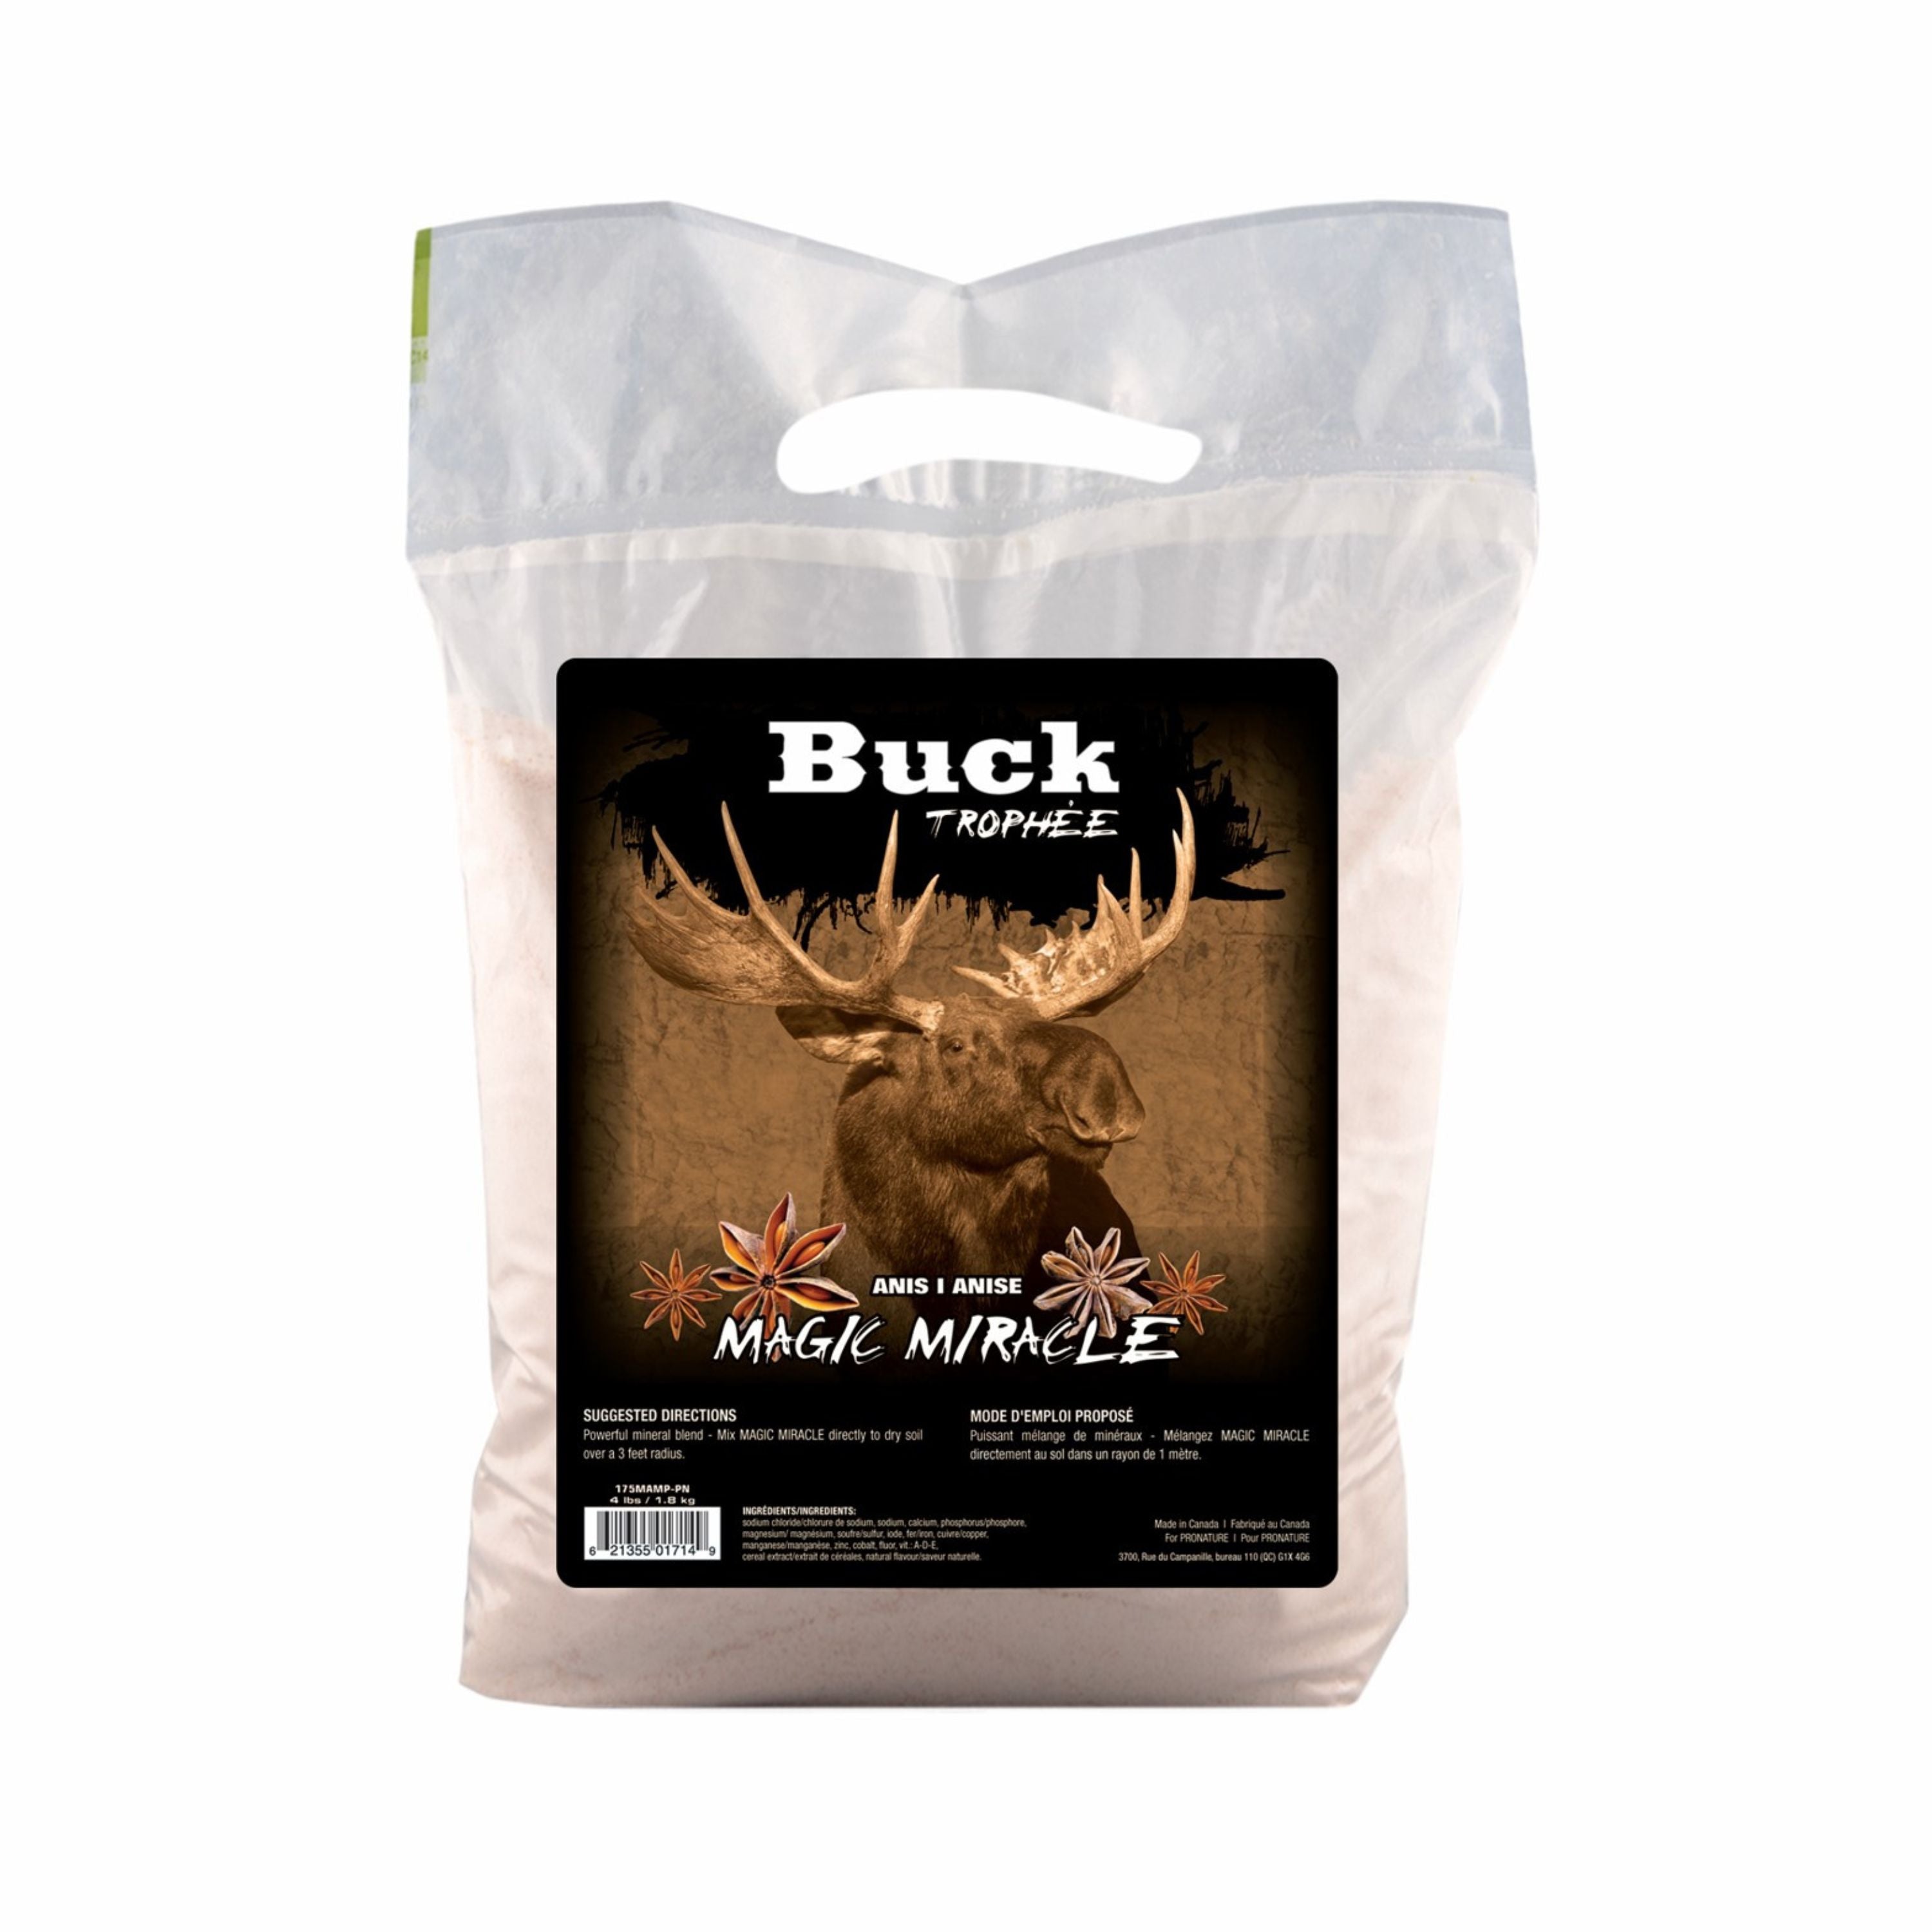 “Magic Miracle” Moose Anise flavored volatile powder - 1.8kg